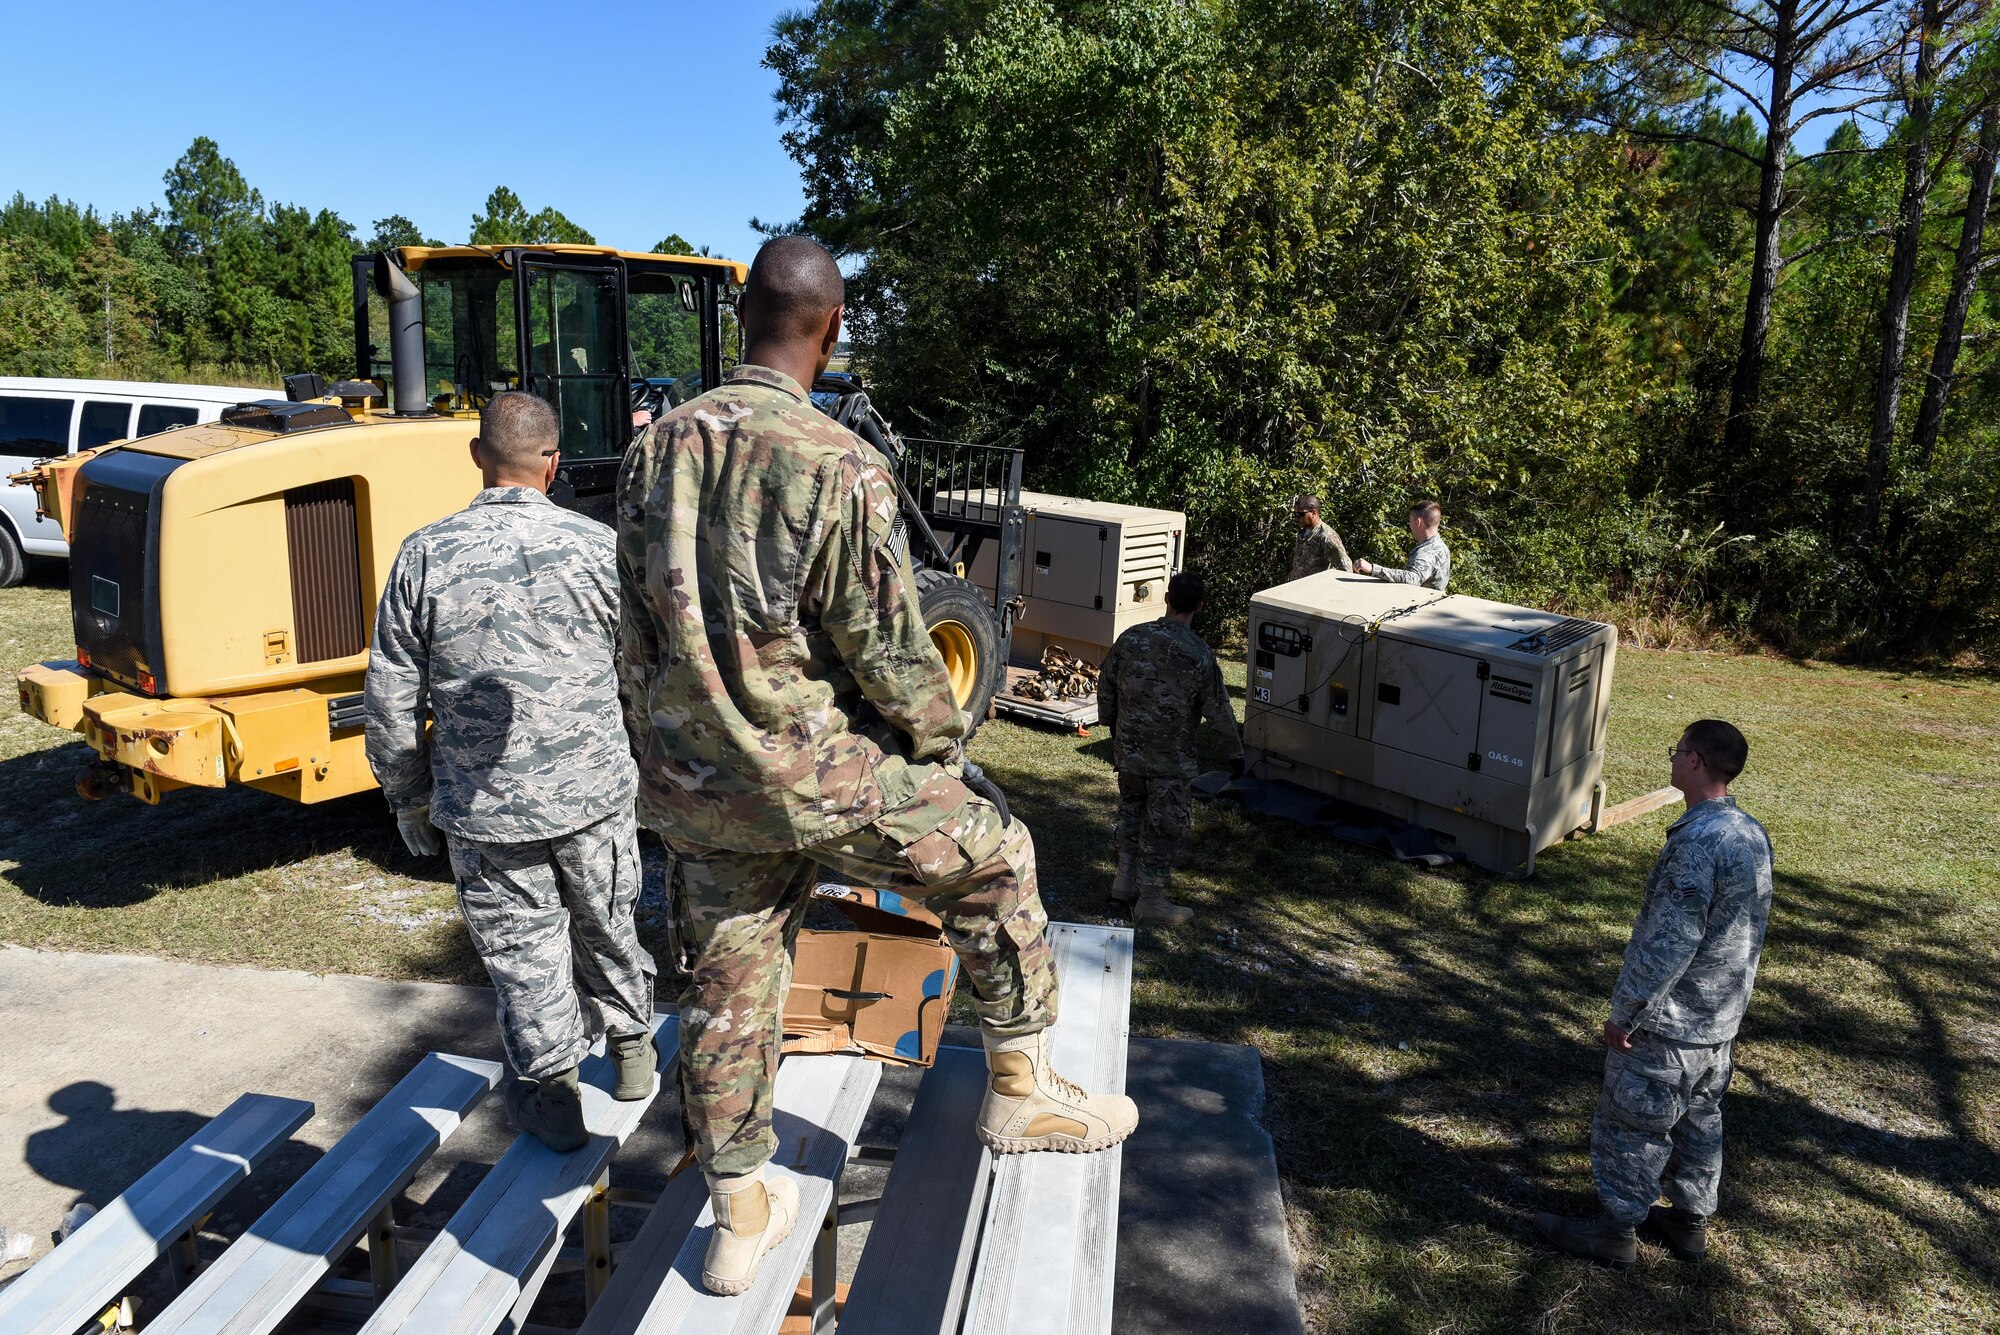 Air Commandos with the 1st Special Operations Civil Engineer Squadron set up generators during the construction of a Joint Special Operations Air Detachment at the Gulfport-Biloxi International Airport in Gulfport, Miss., Oct. 22, 2016. The 1st Special Operations Wing is participating in Exercise Southern Strike to practice tactical skills and test the capabilities of its Airmen and assets in a deployed environment. (U.S. Air Force photo by Senior Airman Jeff Parkinson)